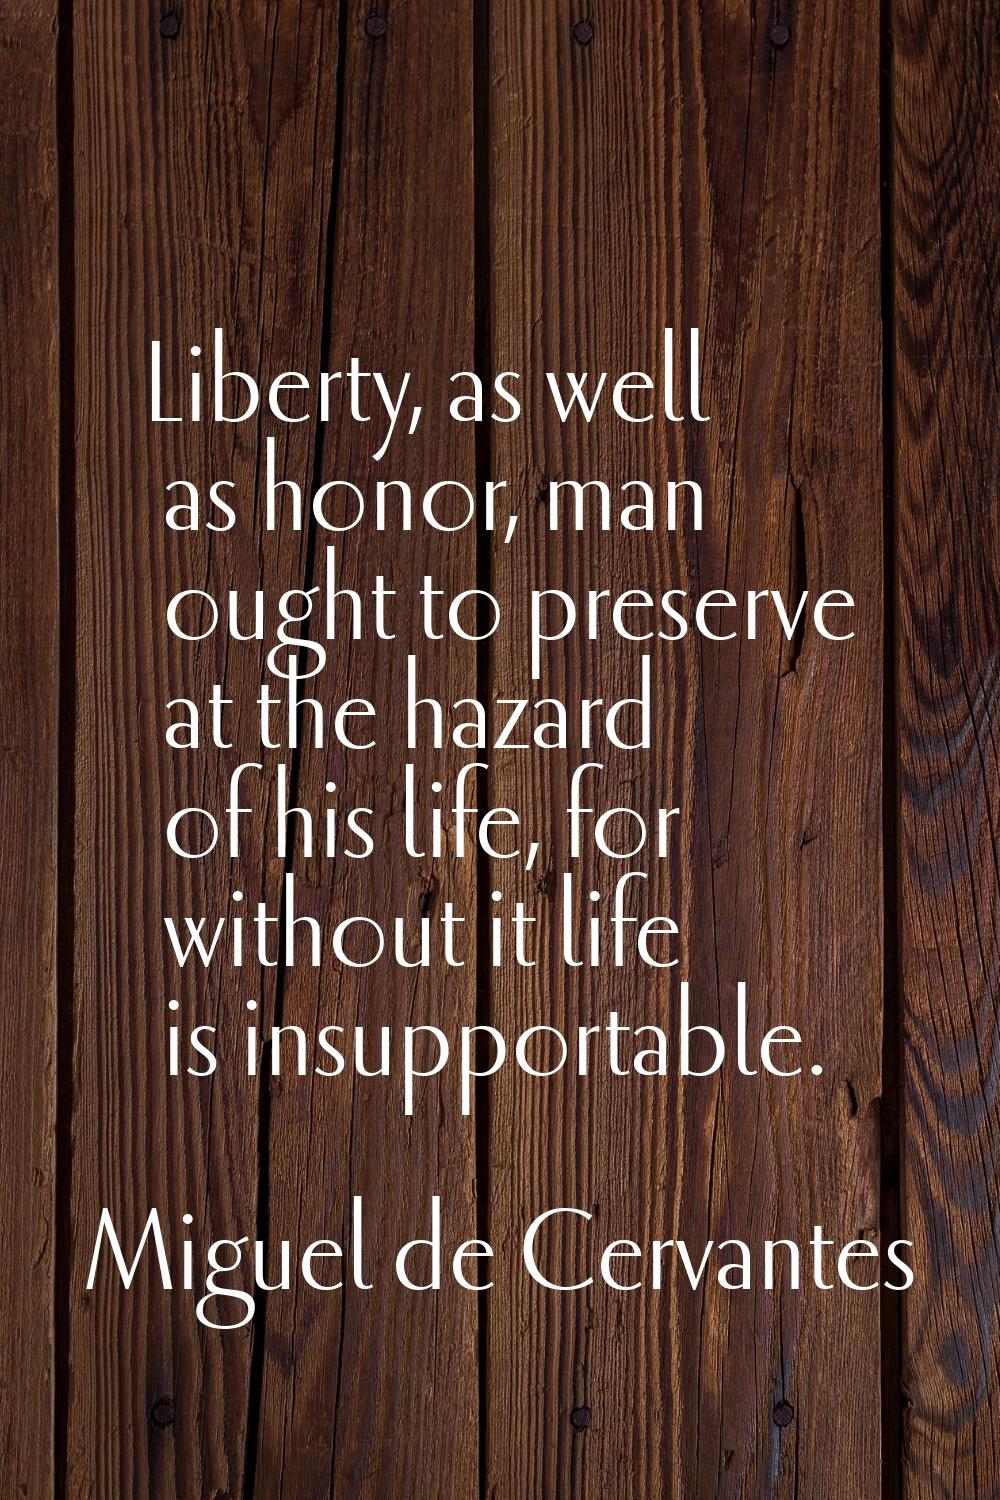 Liberty, as well as honor, man ought to preserve at the hazard of his life, for without it life is 